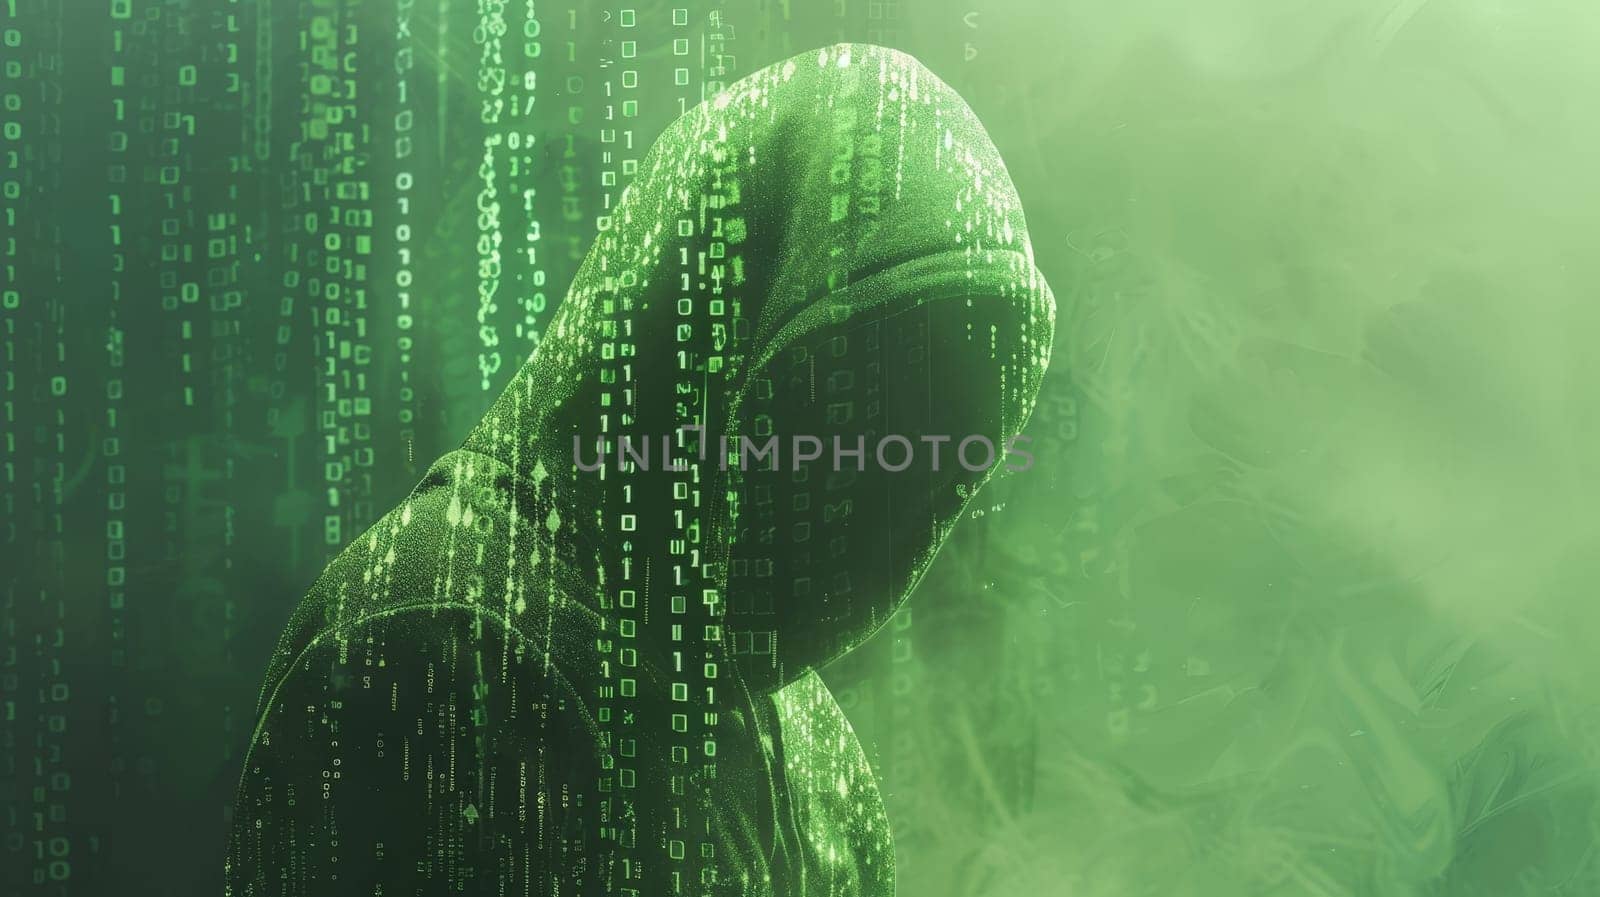 Computer hacker, Ransomware, Cyber security, Threat malware virus, Criminal of technology.